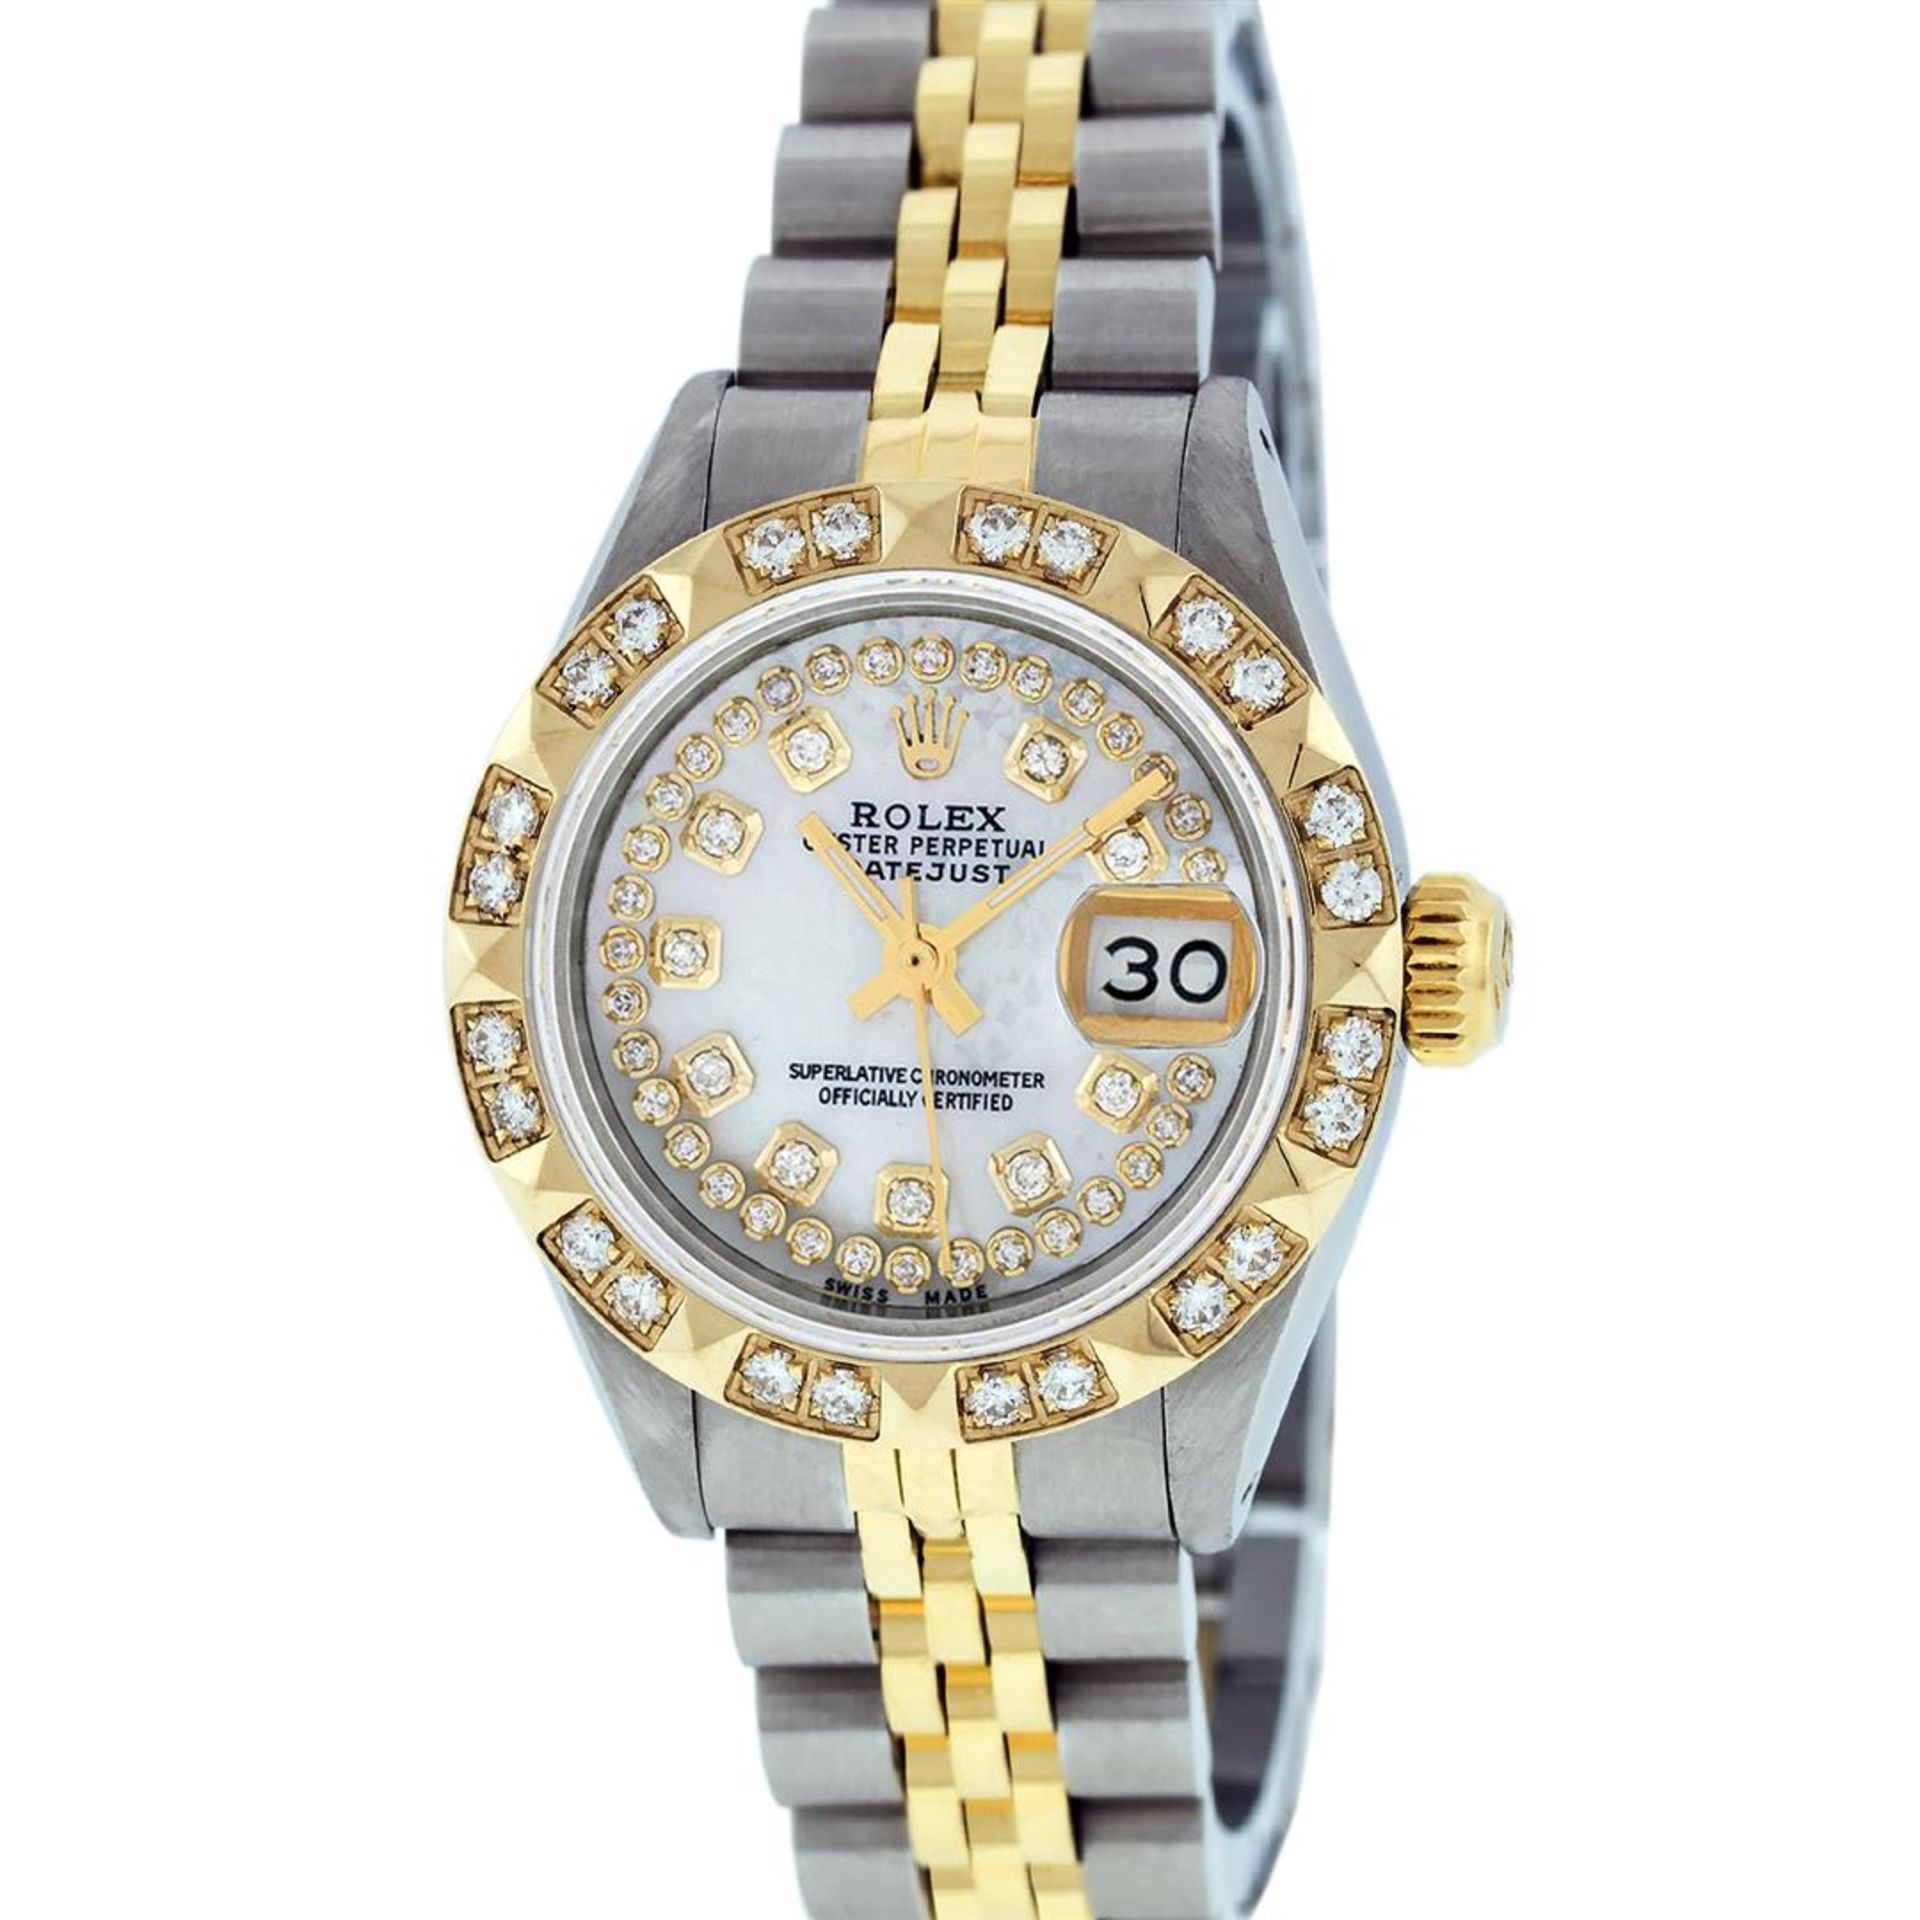 Rolex Ladies 2 Tone Mother Of Pearl Pyramid Diamond Datejust Wristwatch 26MM - Image 2 of 9